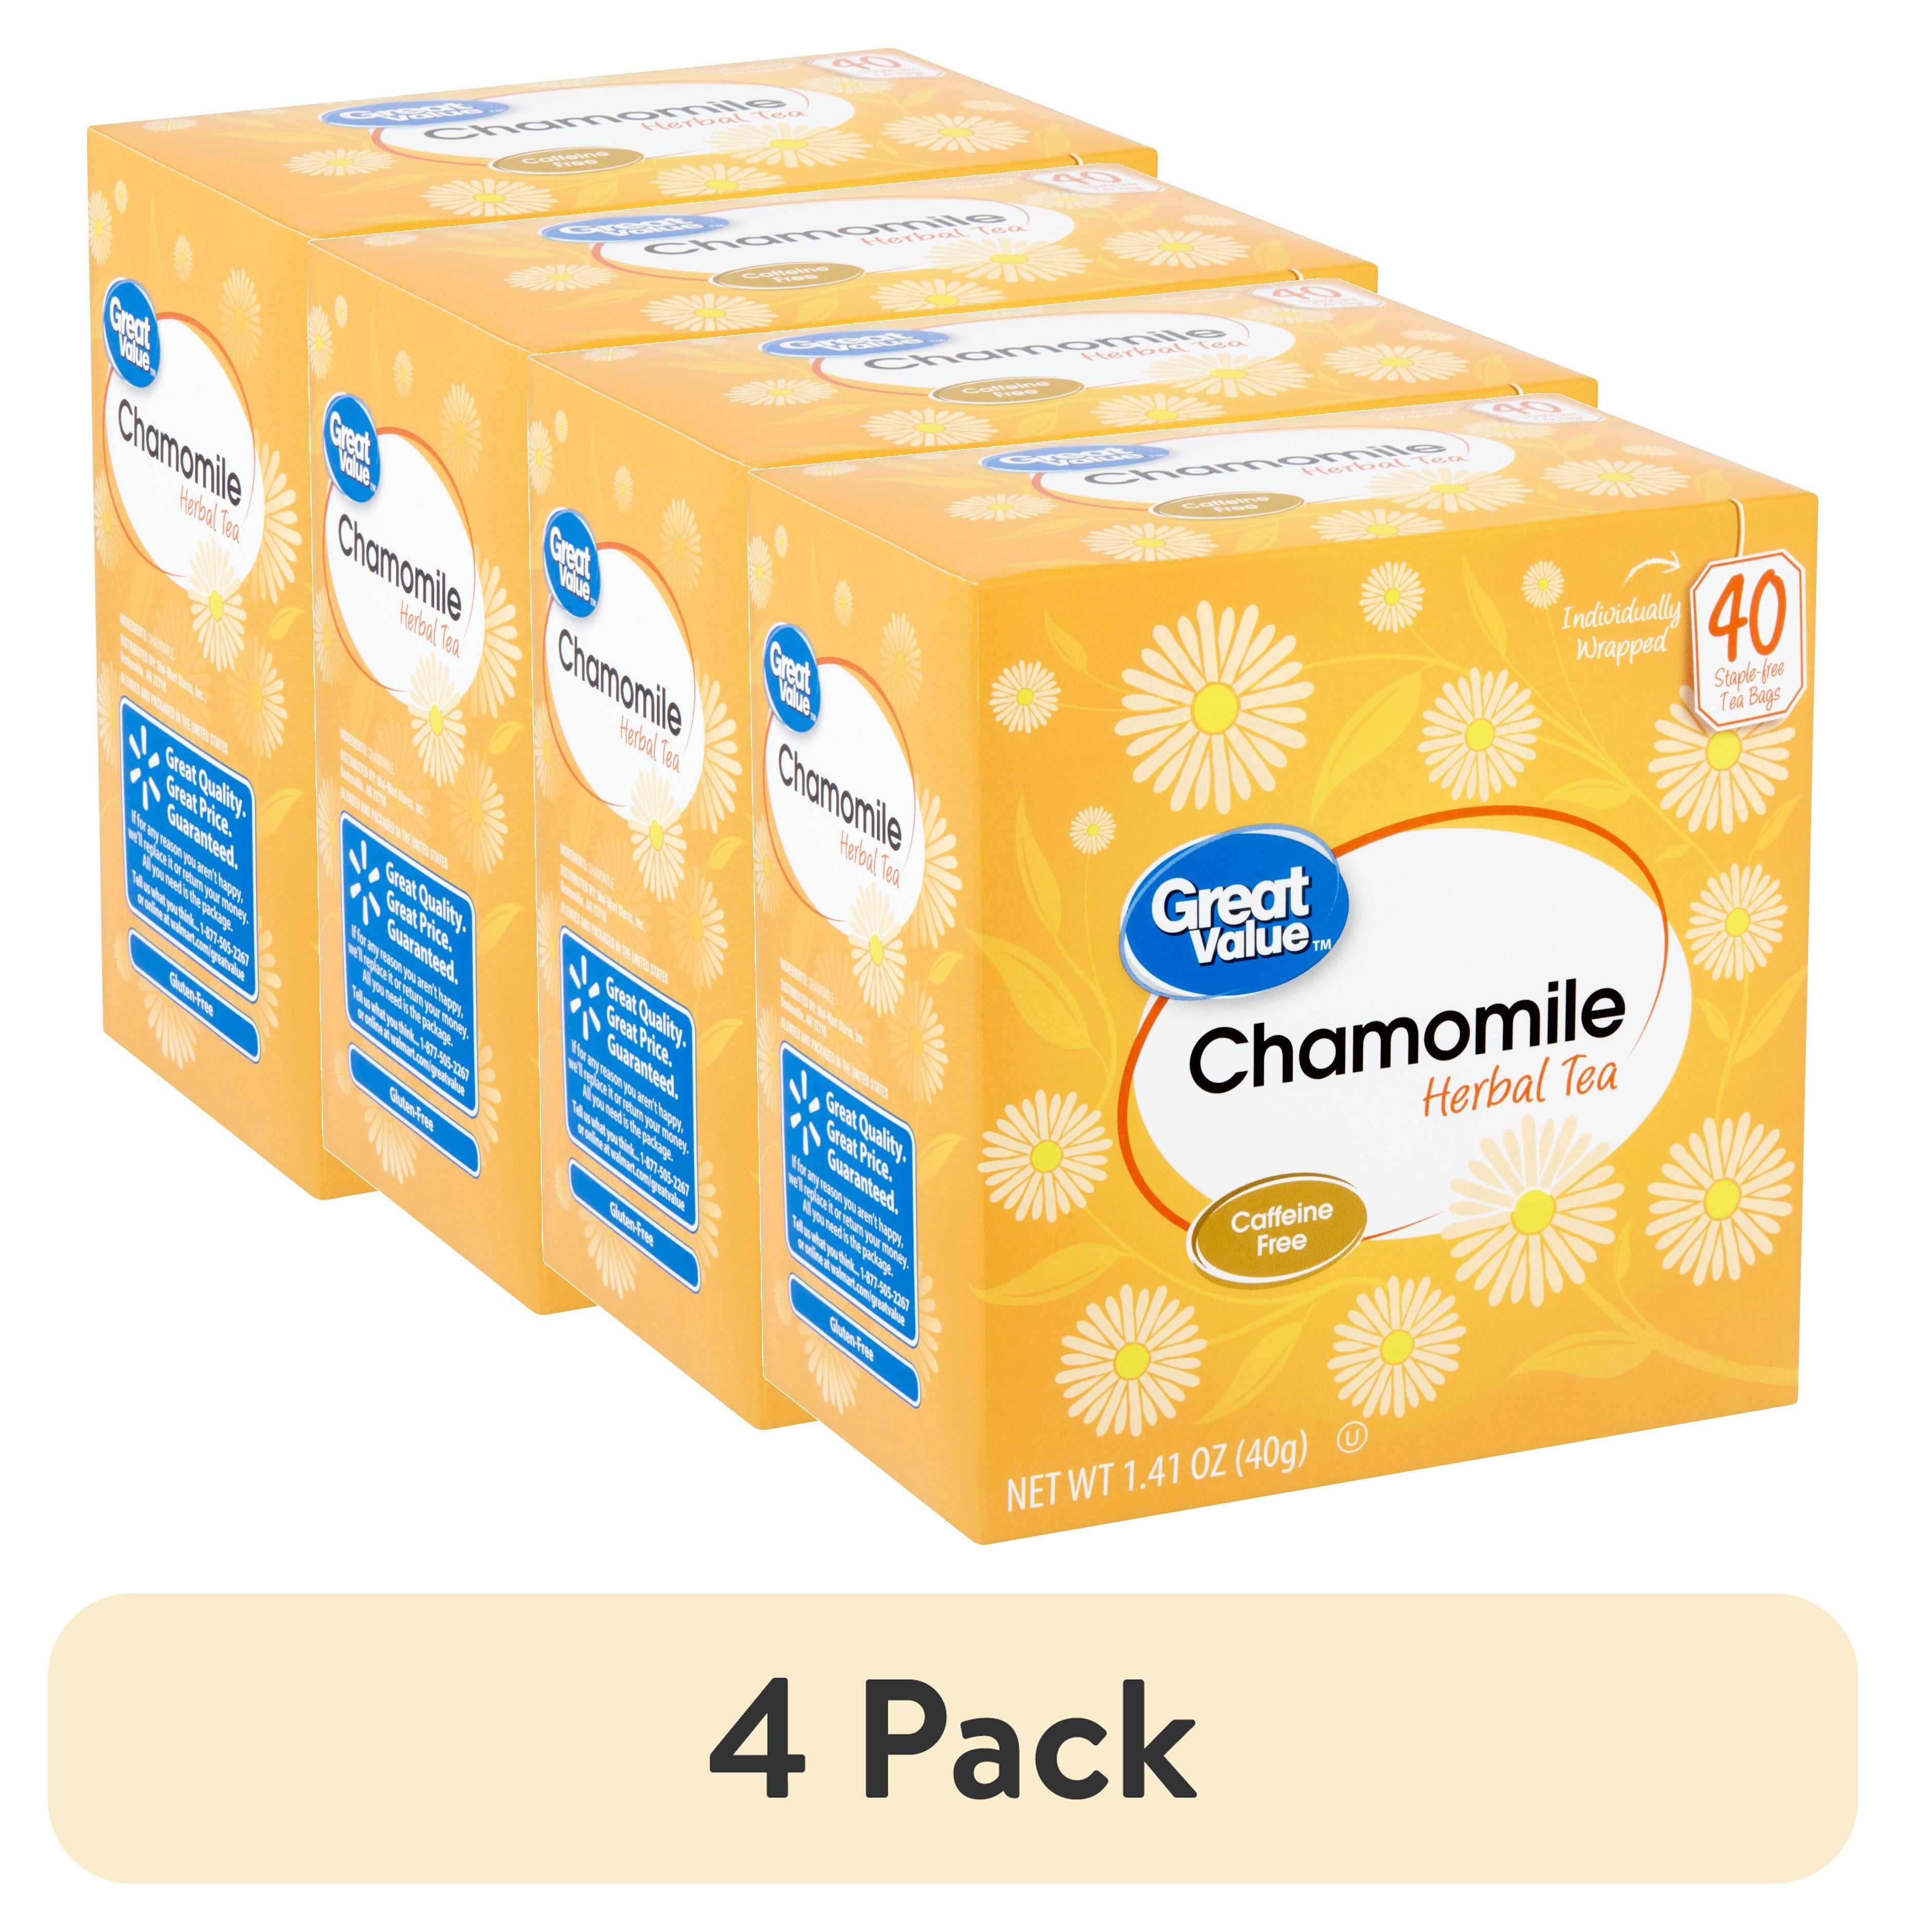 Great Value Chamomile Herbal Tea Bags, 1.41 oz, 40 Ct 